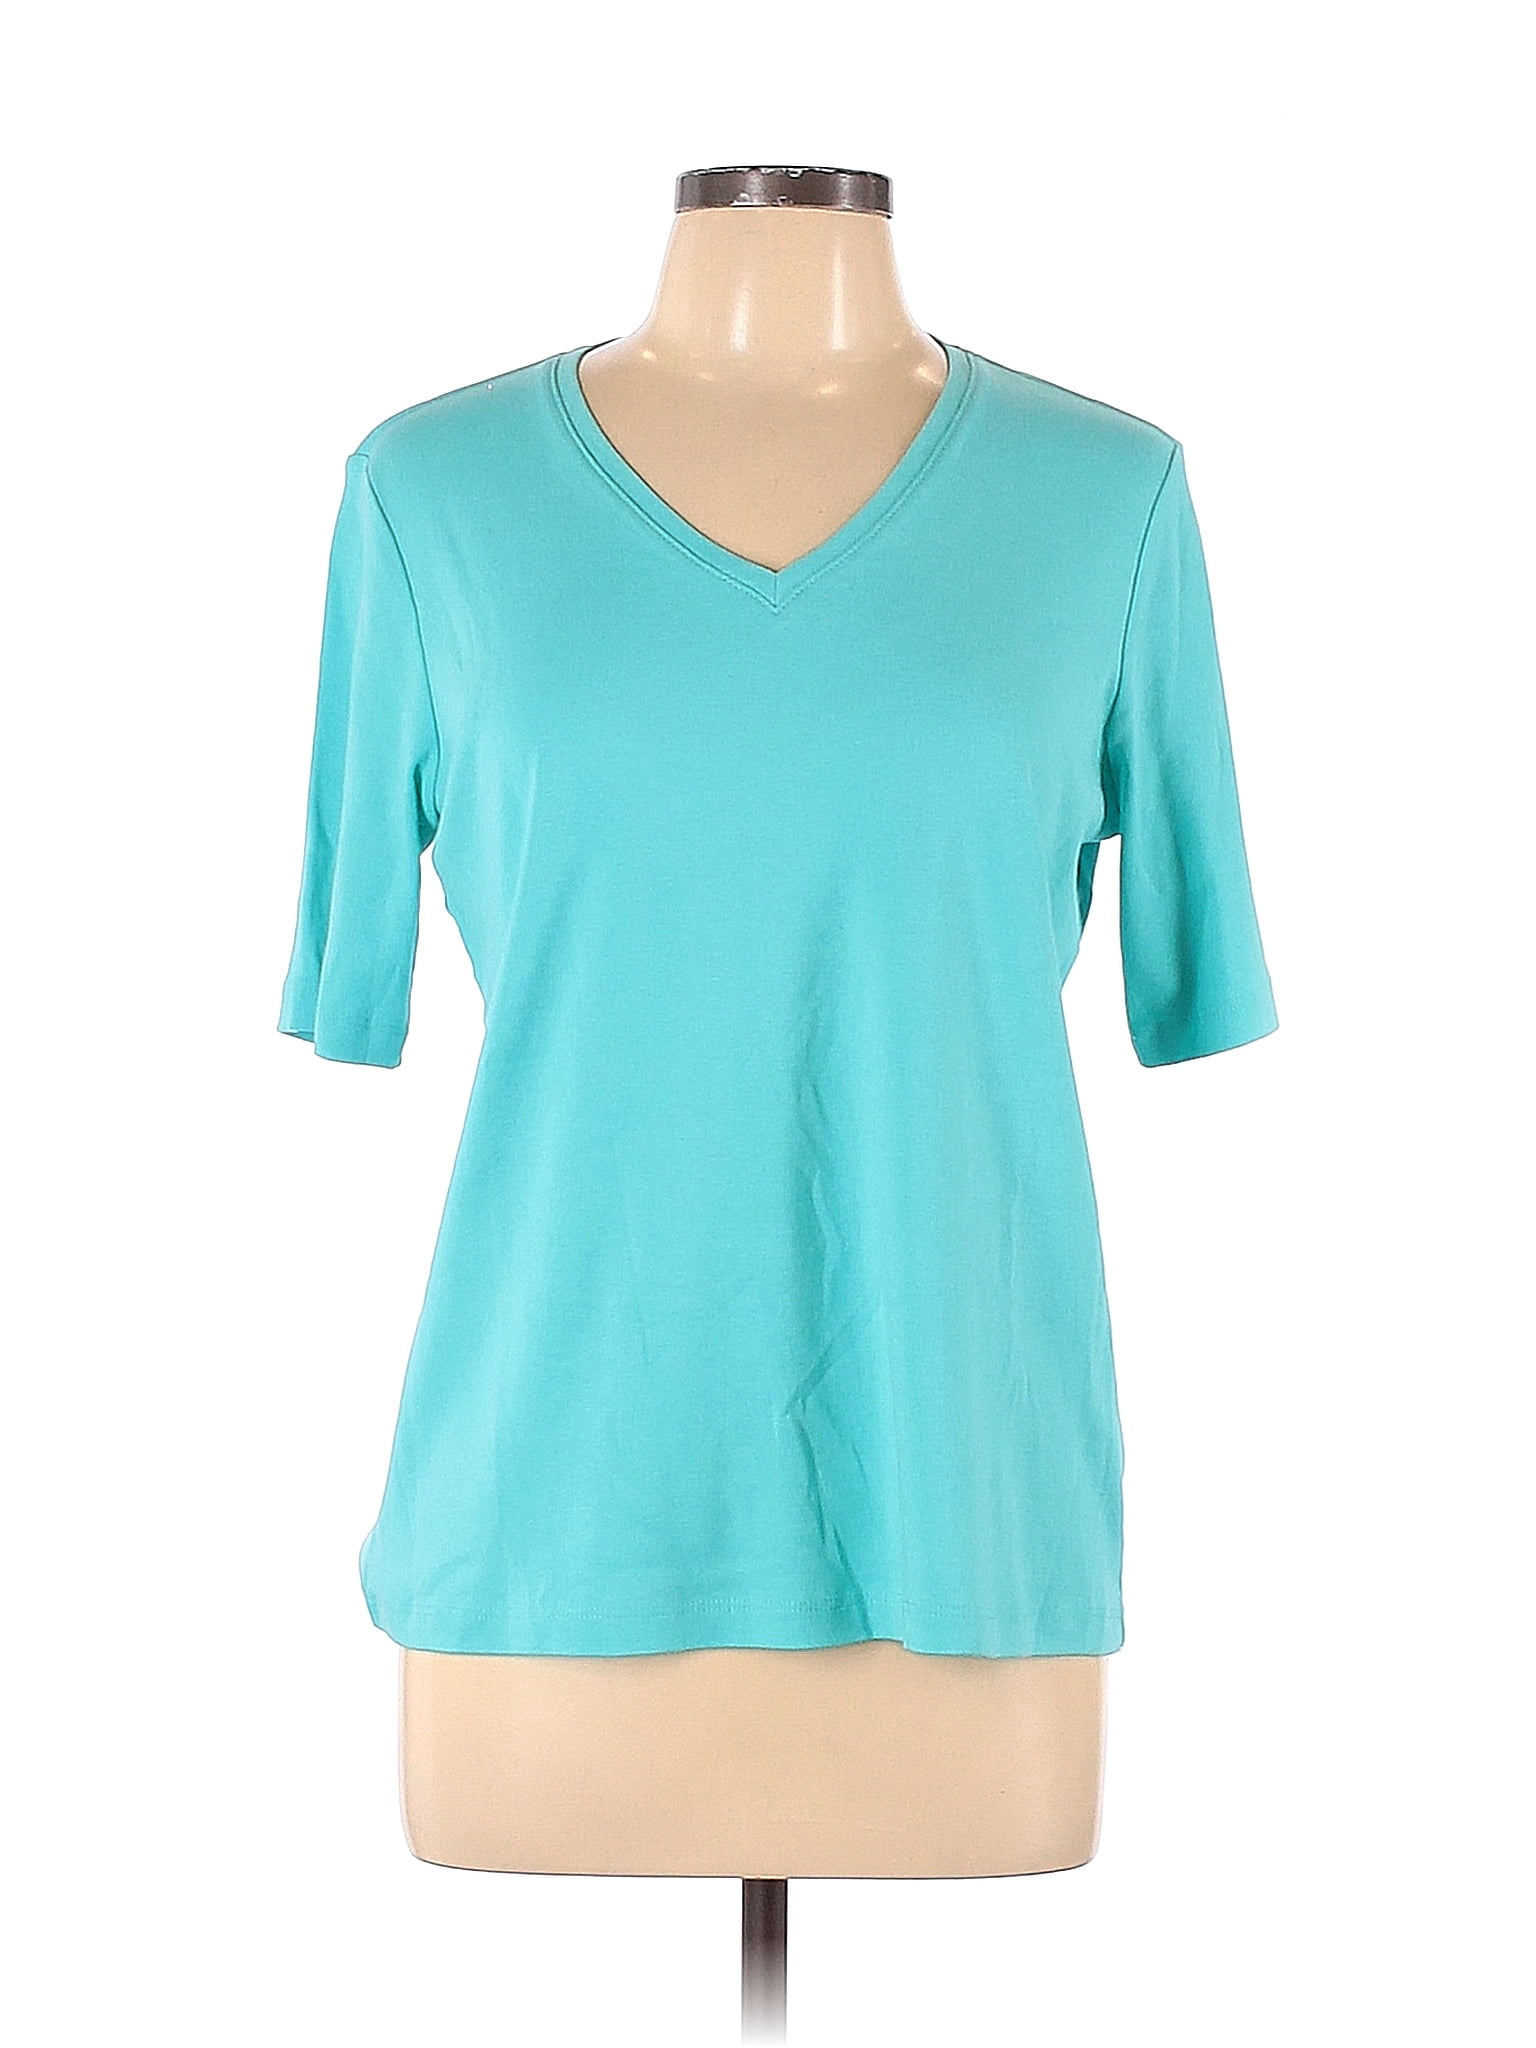 Chico's 100% Cotton Solid Blue Teal Short Sleeve T-Shirt Size Lg (2 ...